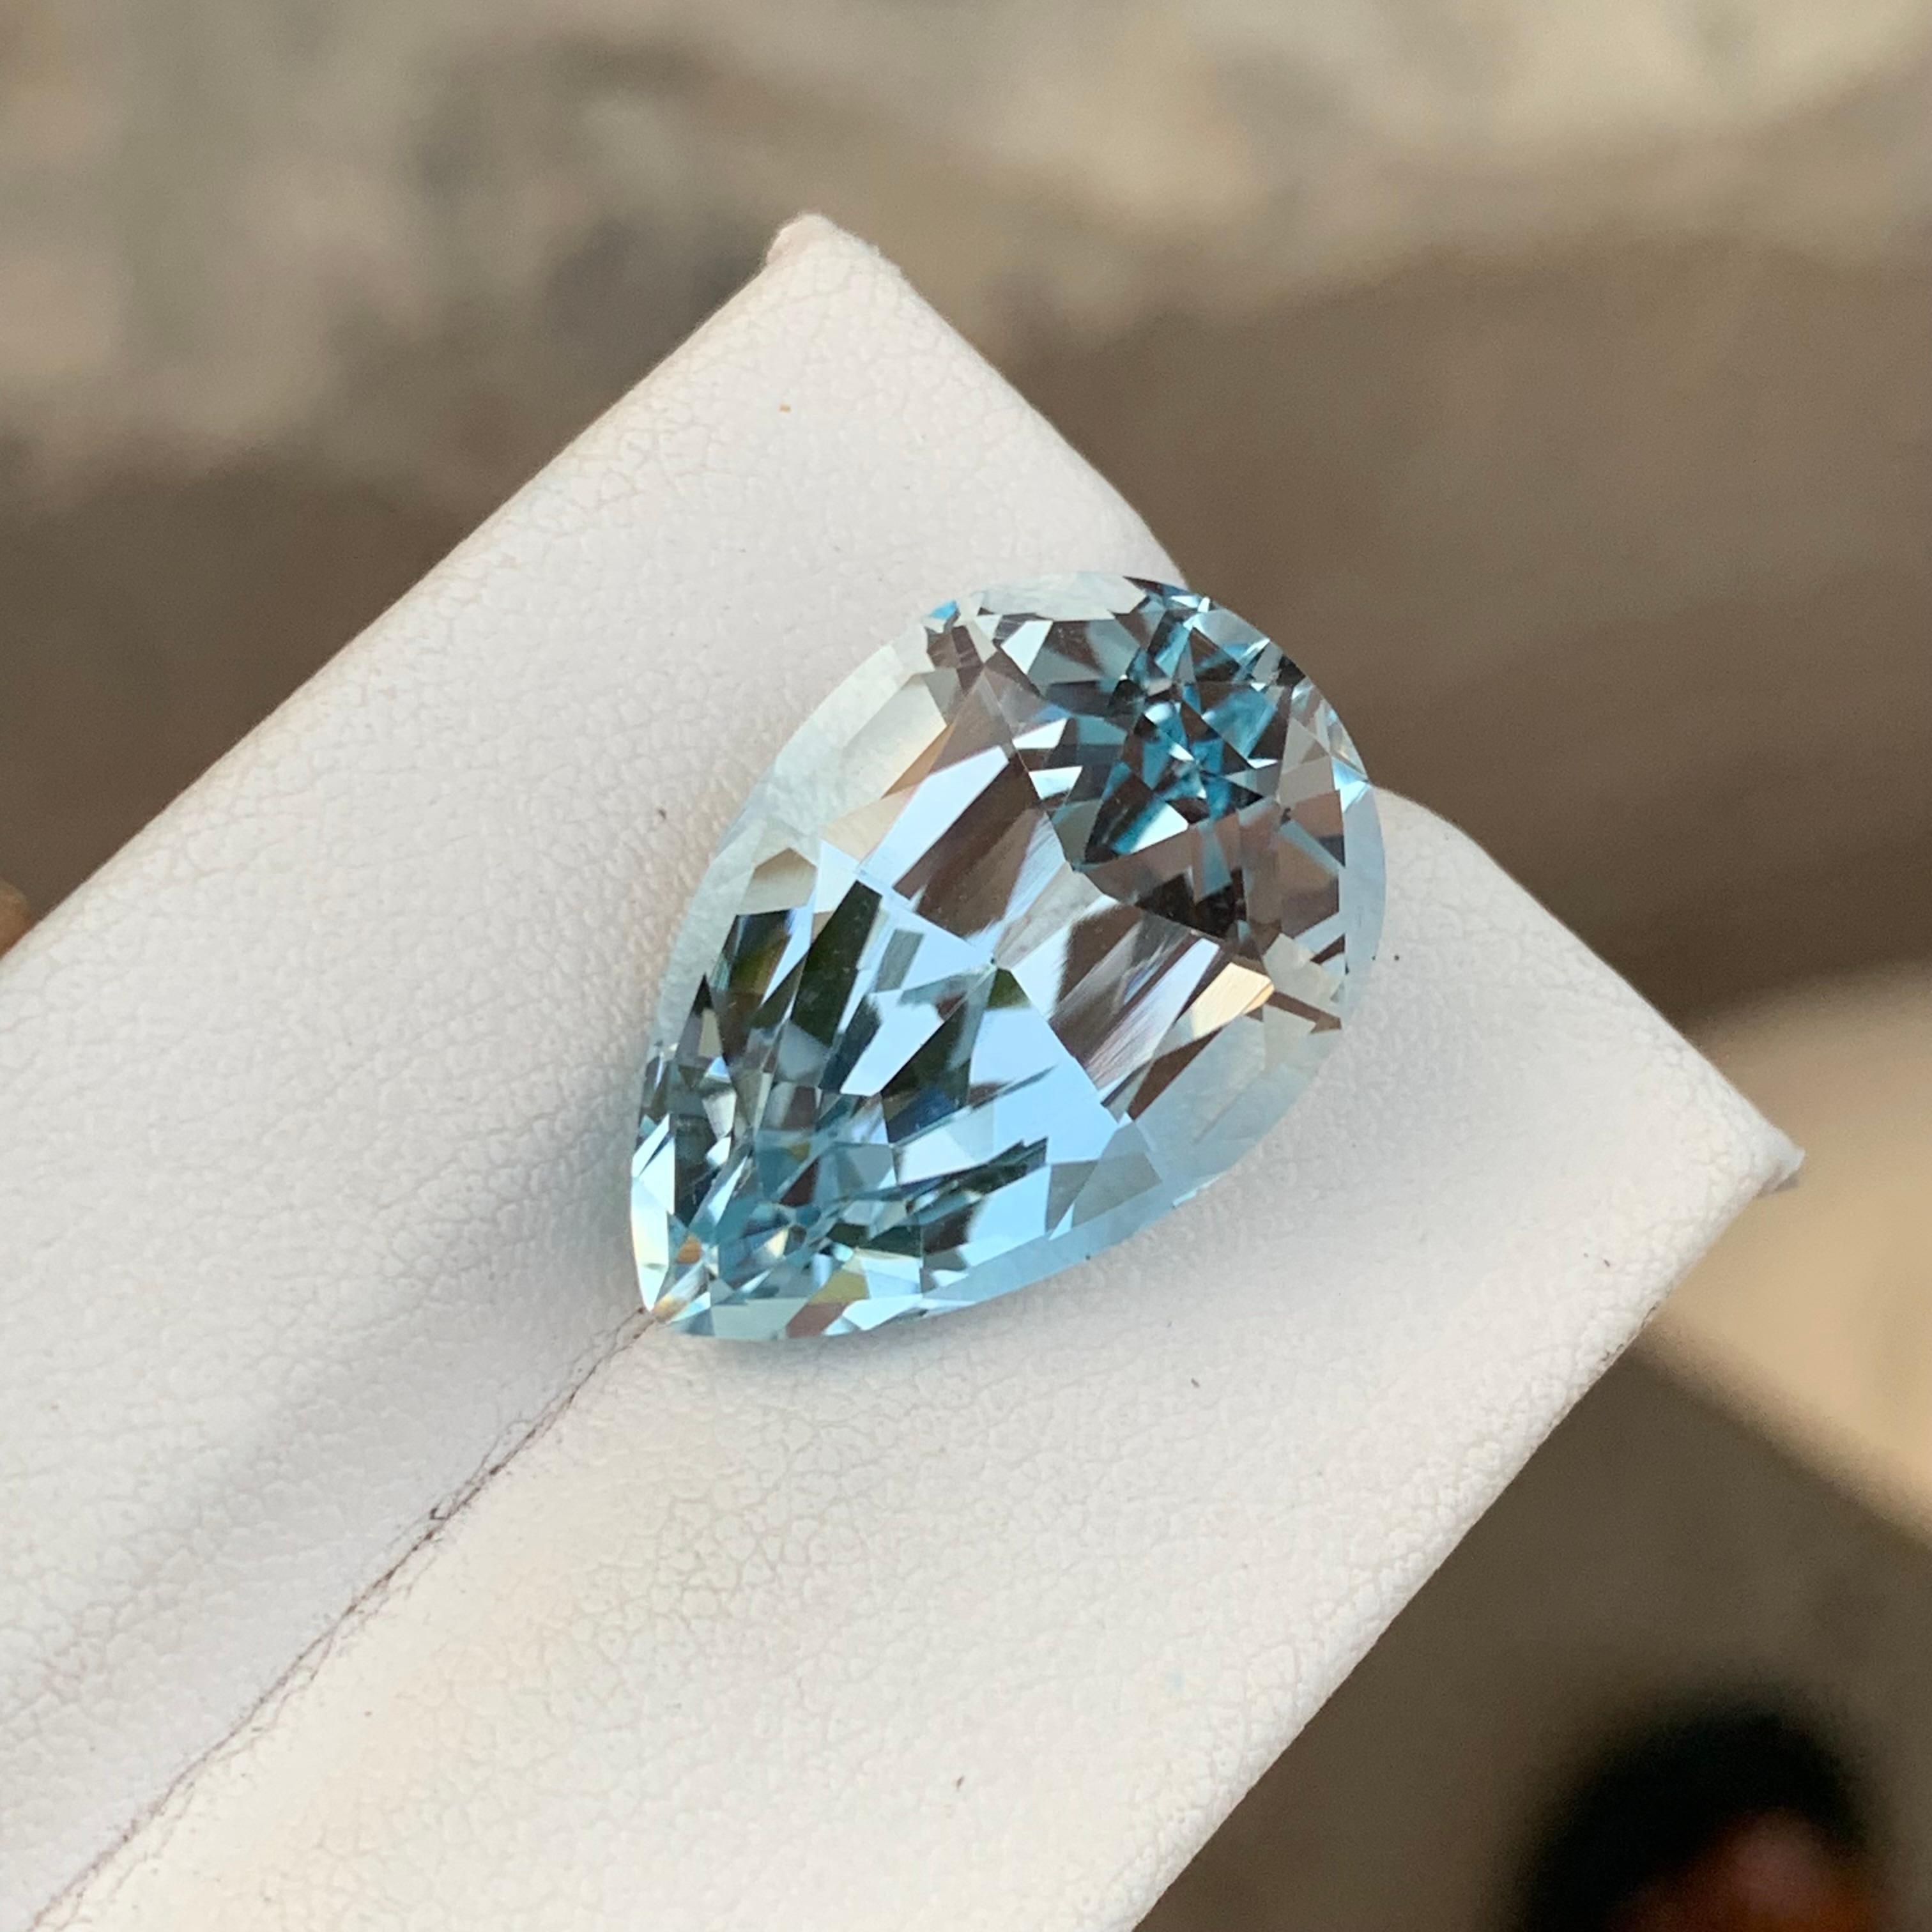 Faceted Light Blue Topaz
Weight: 21.40 Carats
Dimension: 20 x 14 x 10.5 Mm
Origin: Brazil
Color: Light Blue
Shape: Pear
Certificate: On Demand
.
Blue topaz is a mesmerizing gemstone that showcases a captivating blue hue reminiscent of clear blue